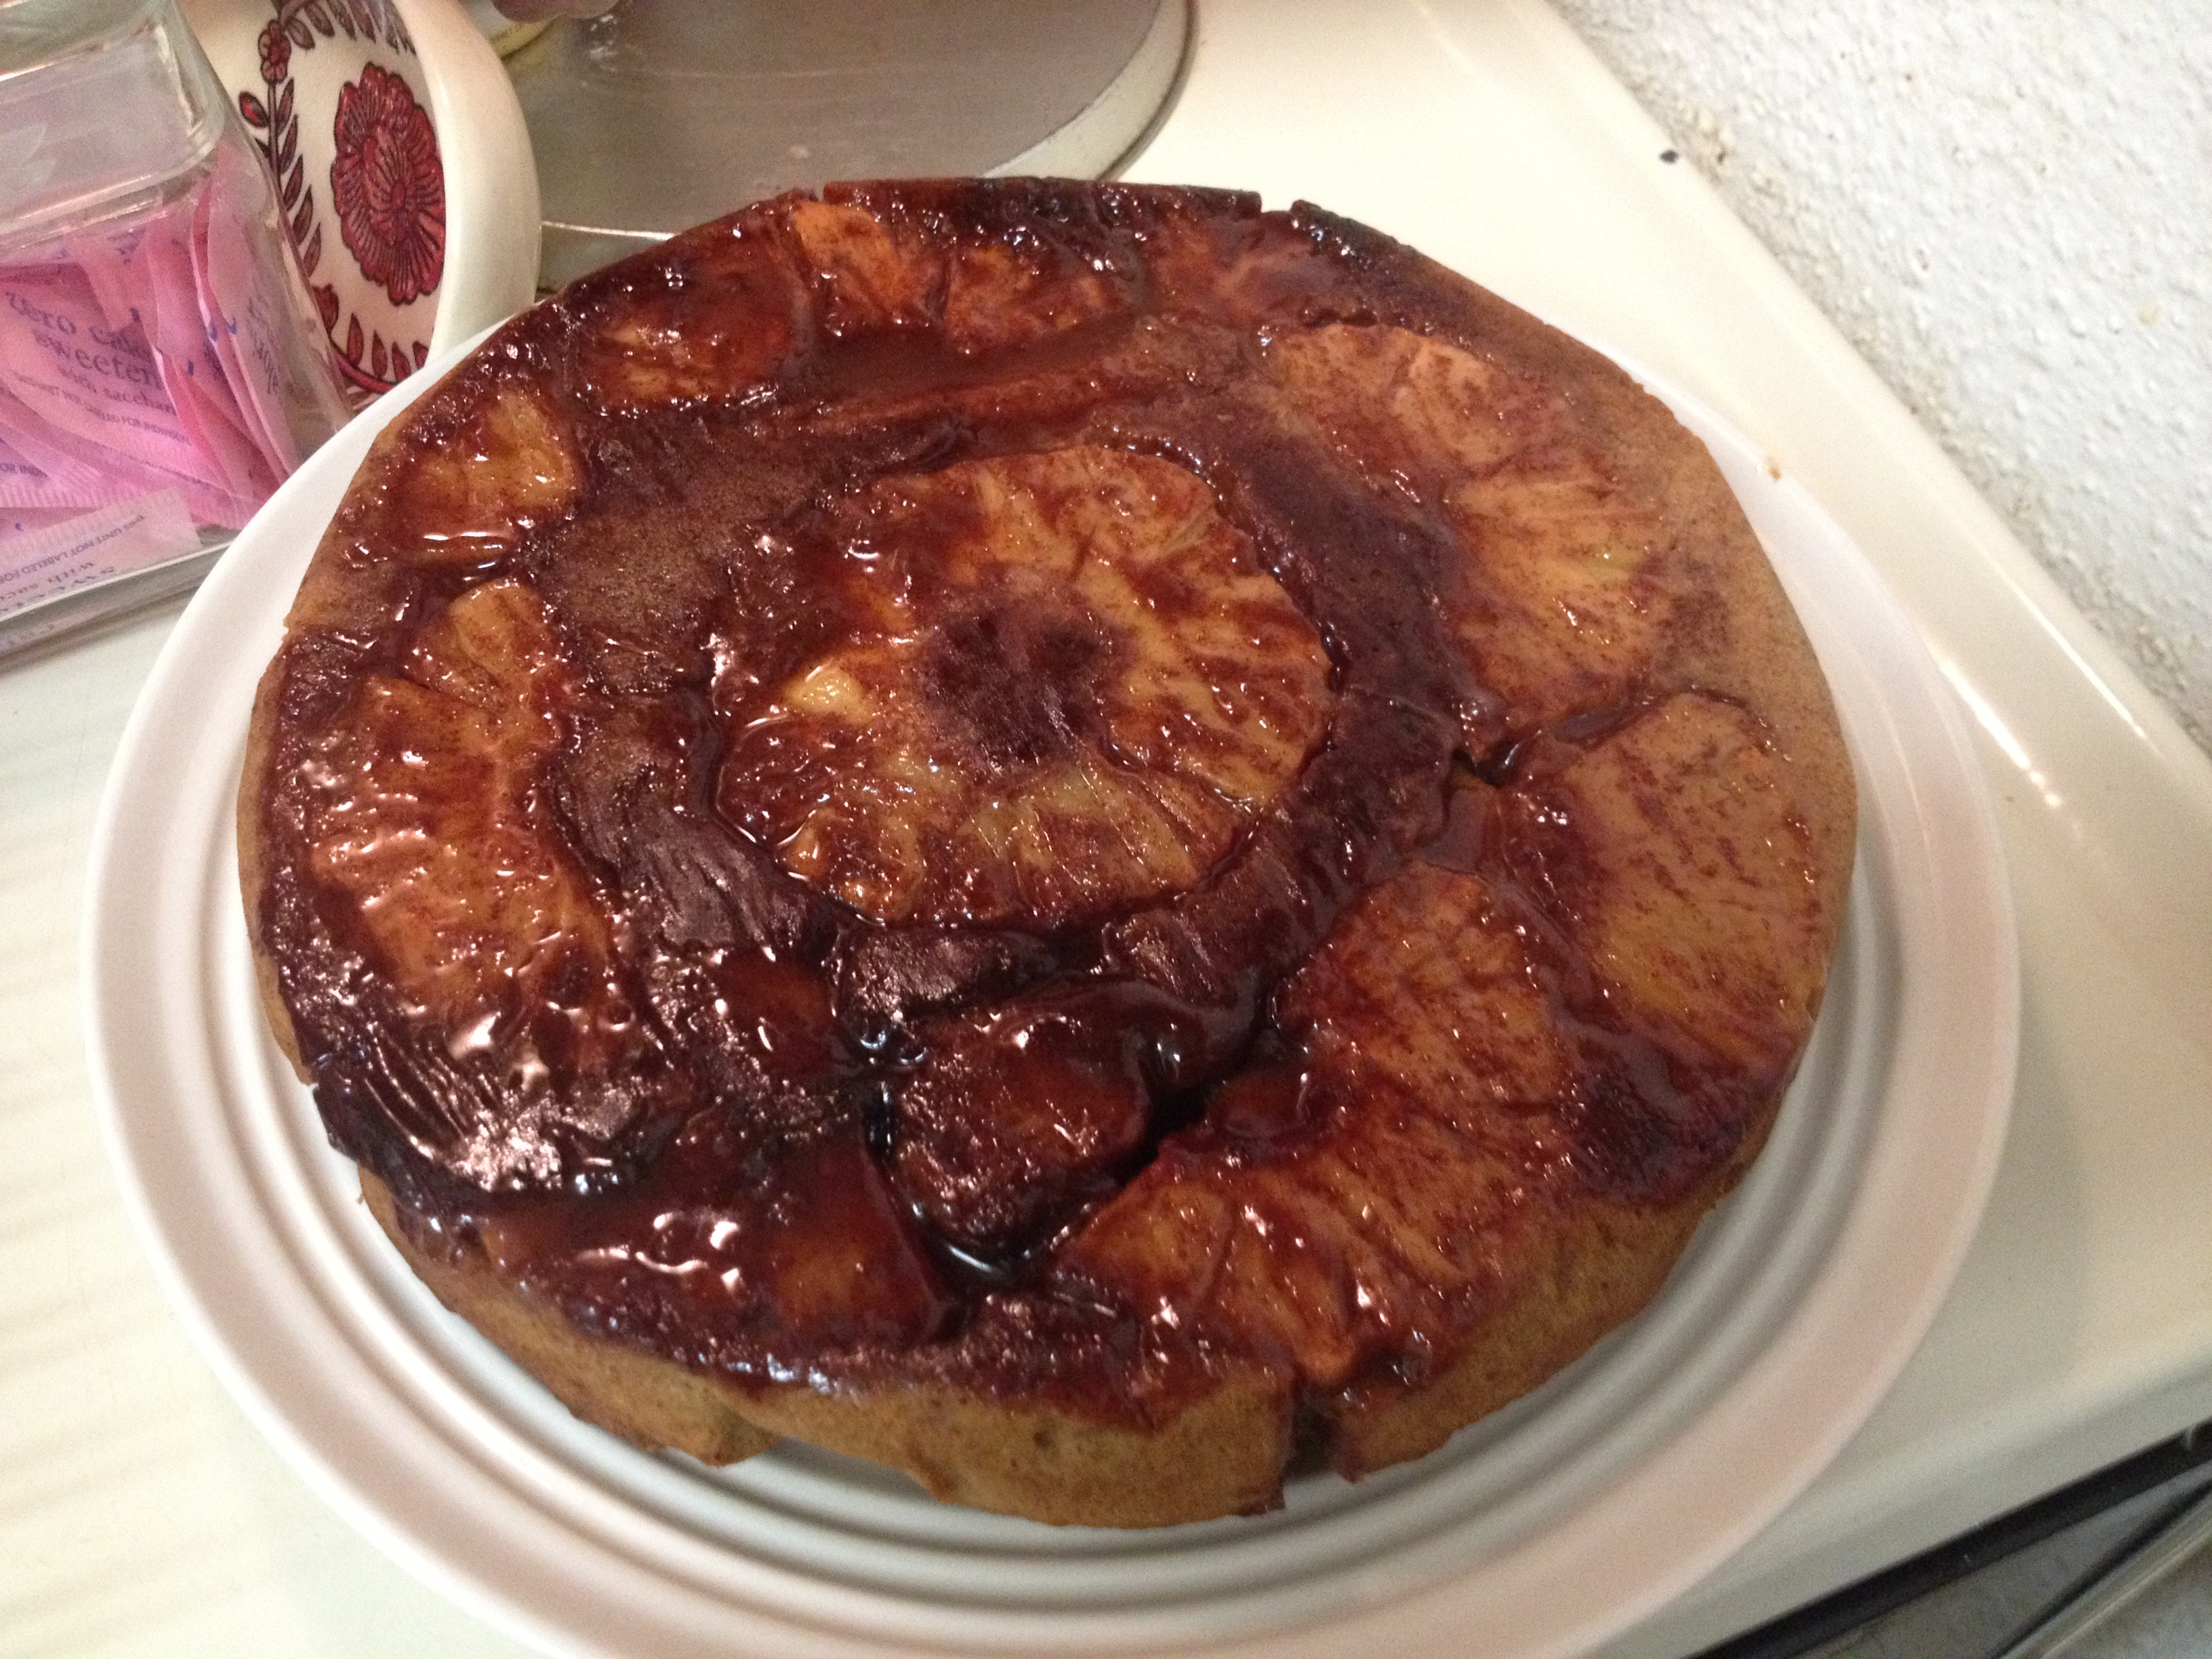 Pineapple upside down cake on a plate with pineapple on top